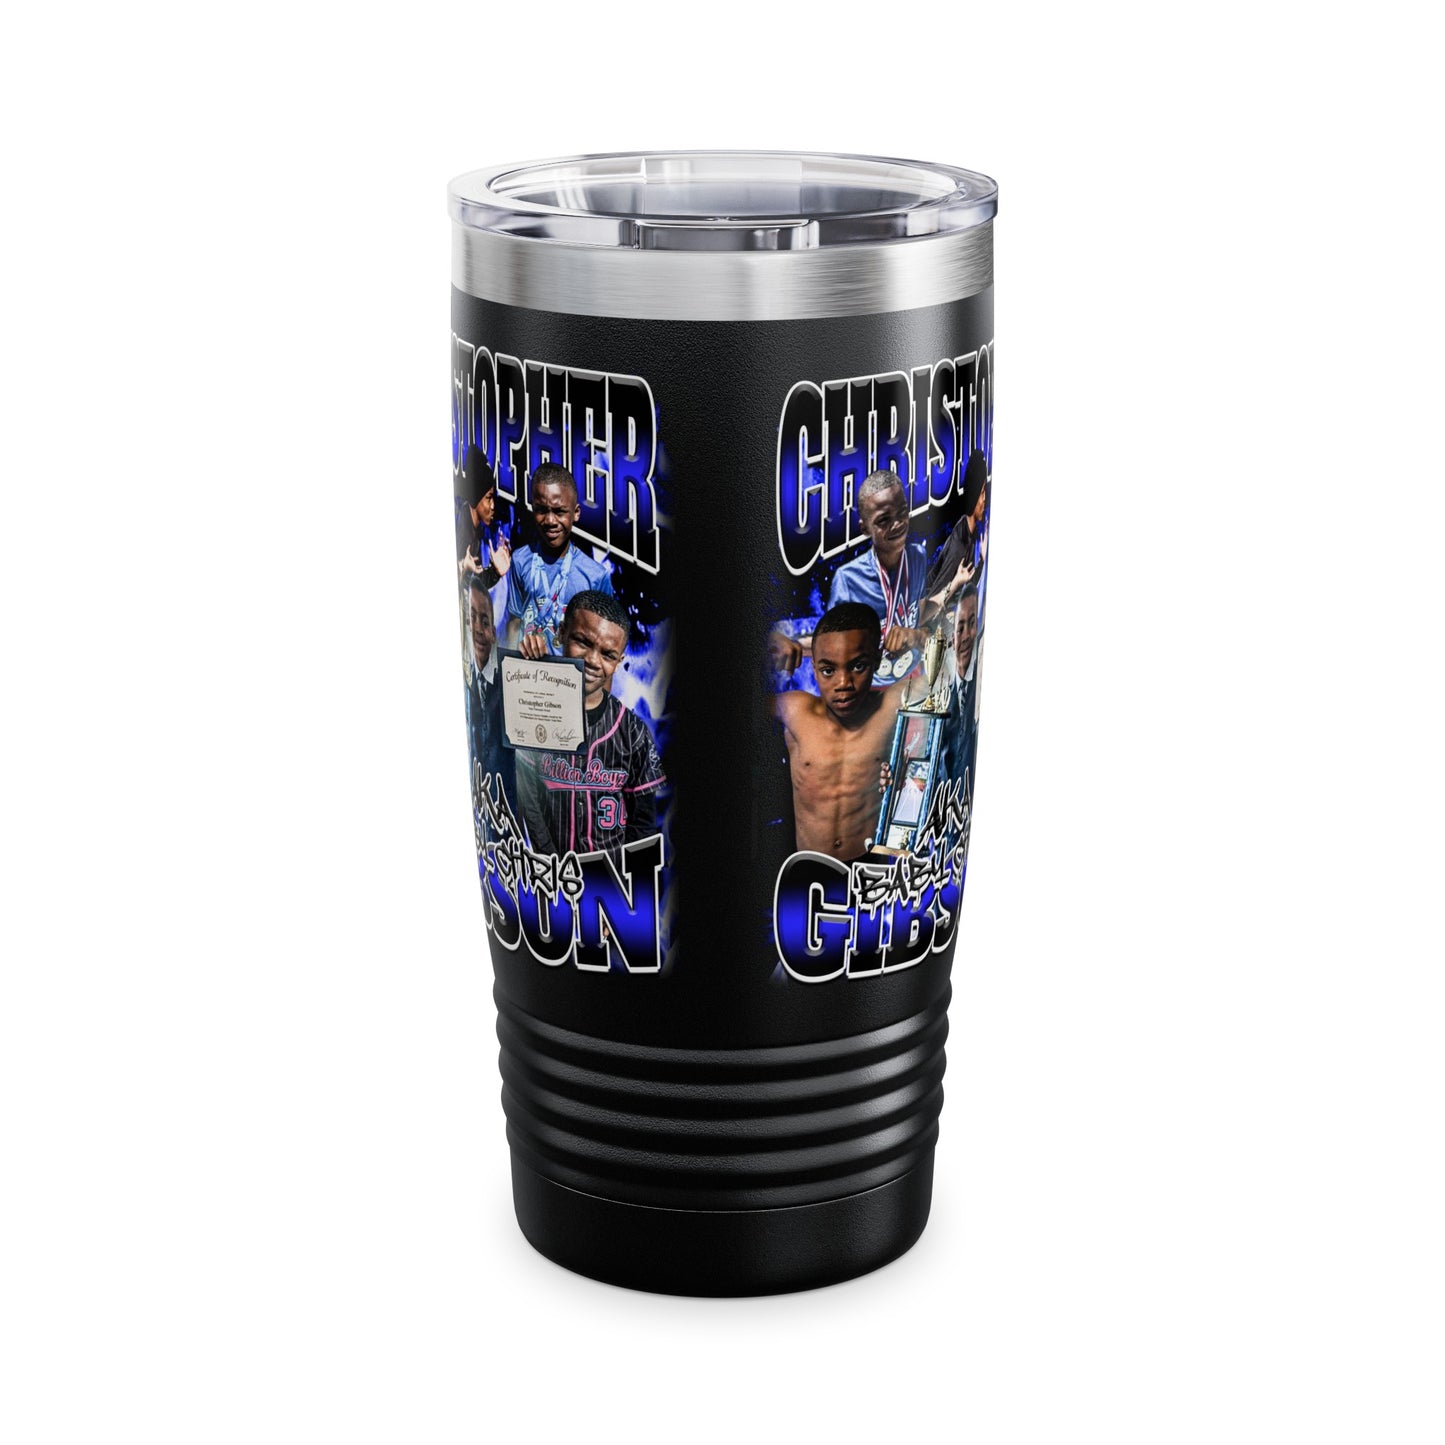 Christopher Gibson Stainless Steal Tumbler